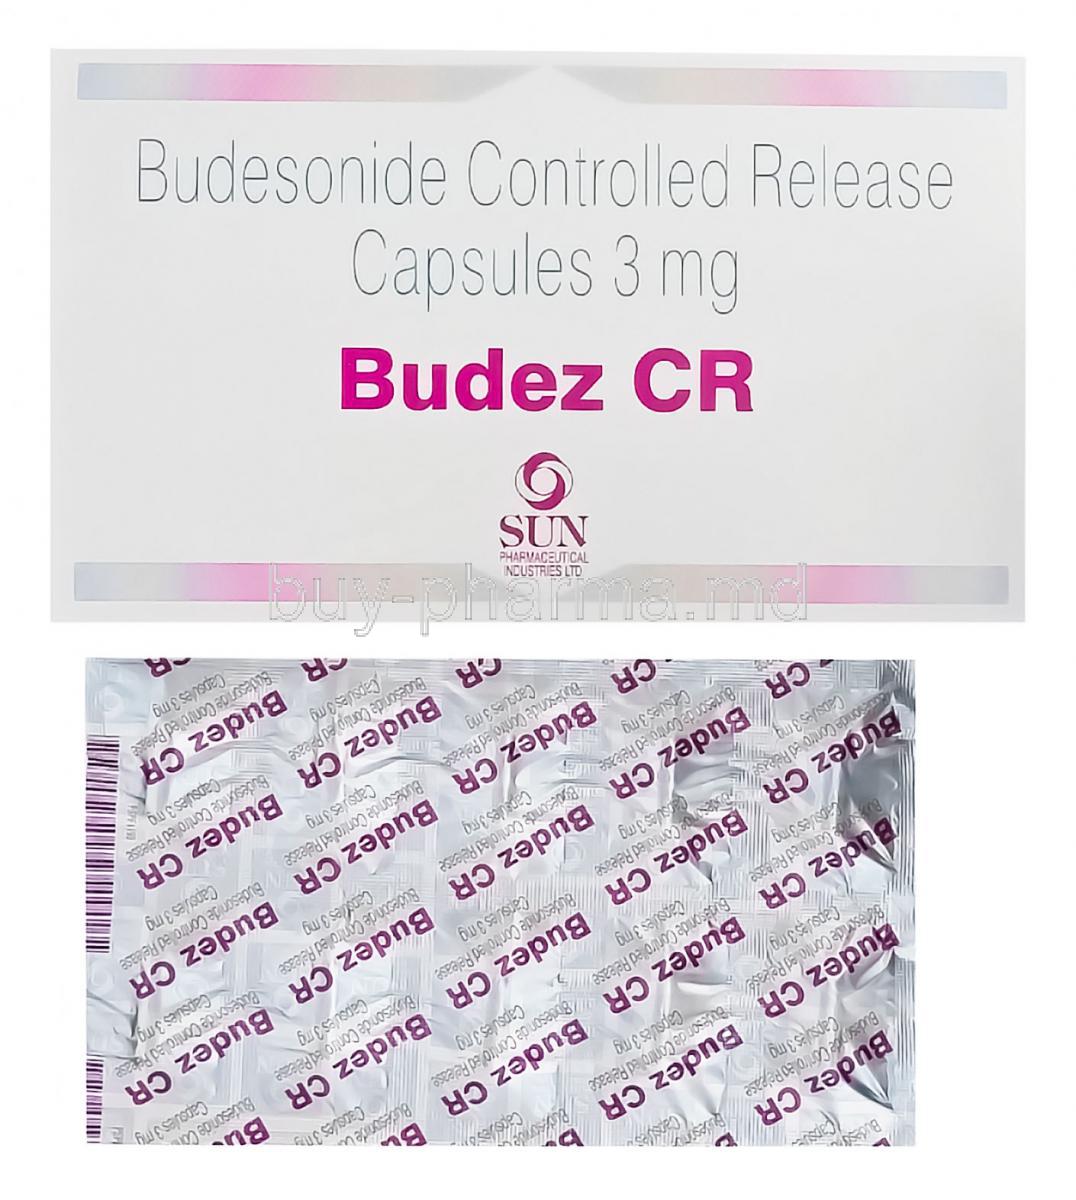 Budez CR, Generic Entocort, Budesonide 3mg Controlled Release